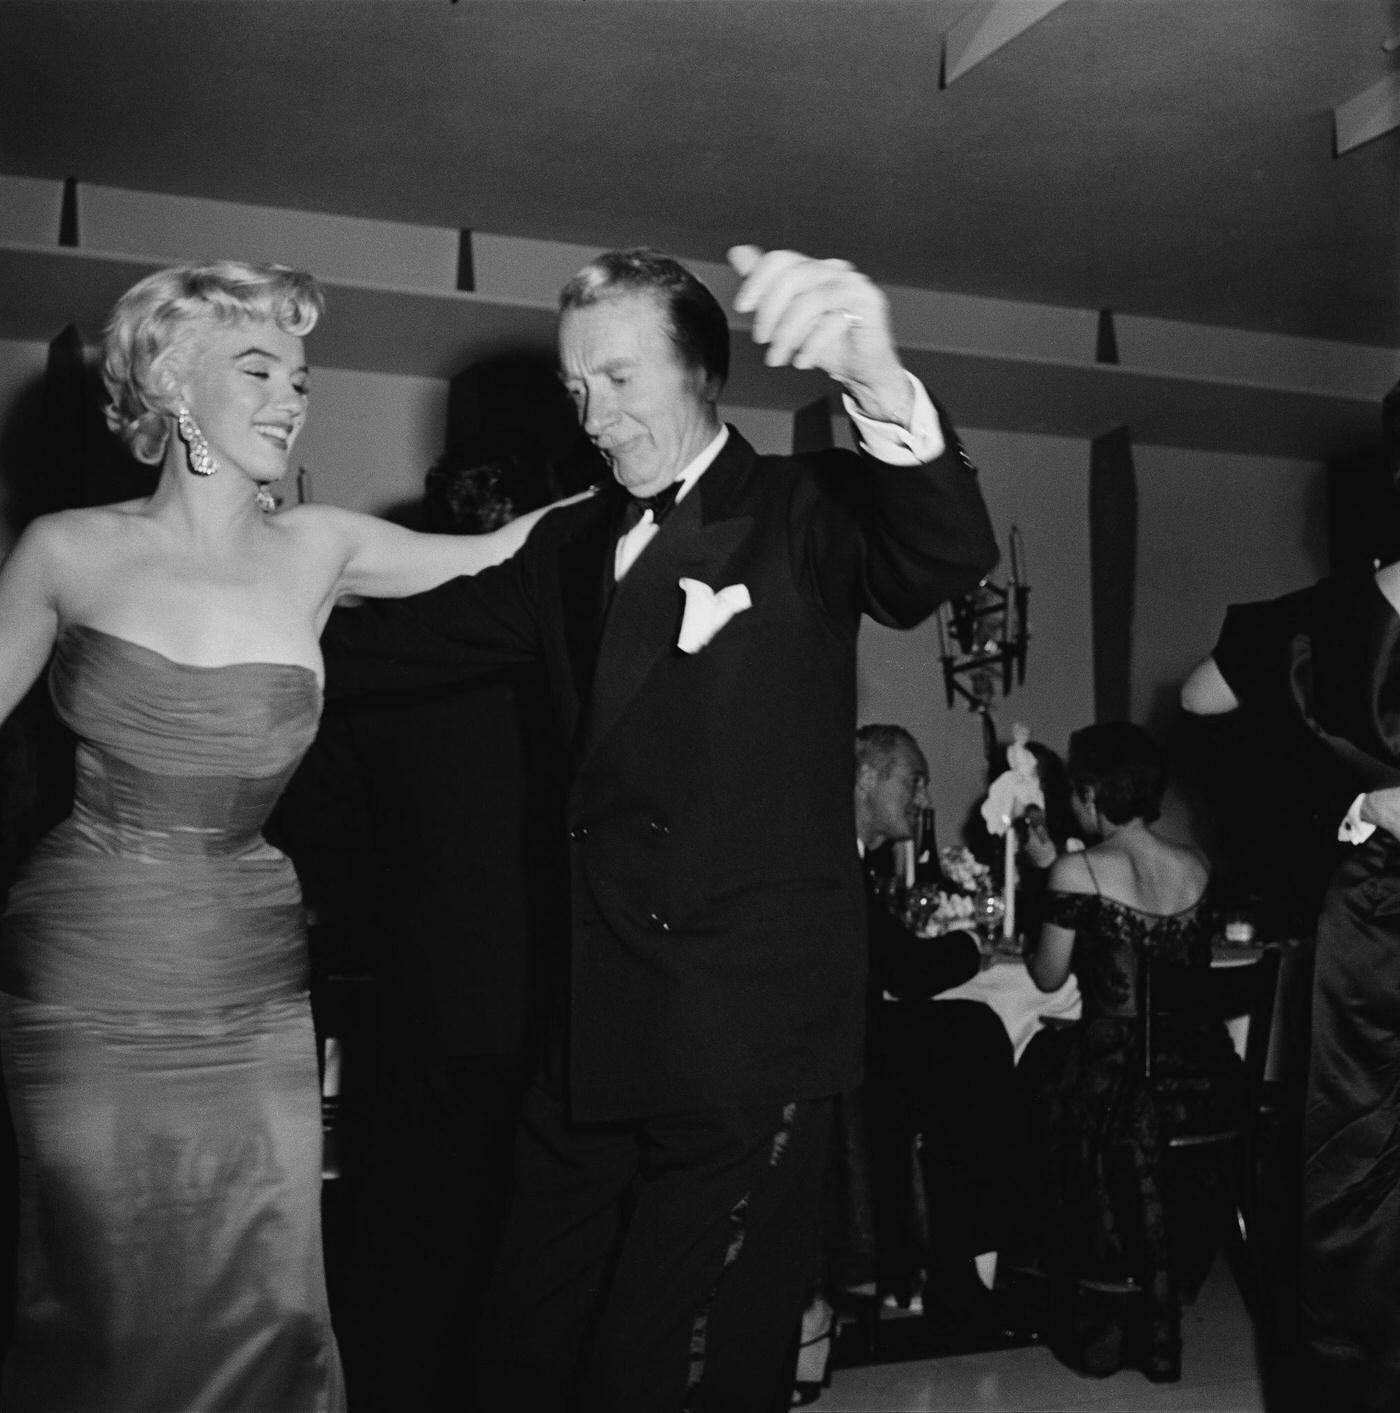 Marilyn Monroe dances with actor Clifton Webb at the wrap party for the filming of "The Seven Year Itch"